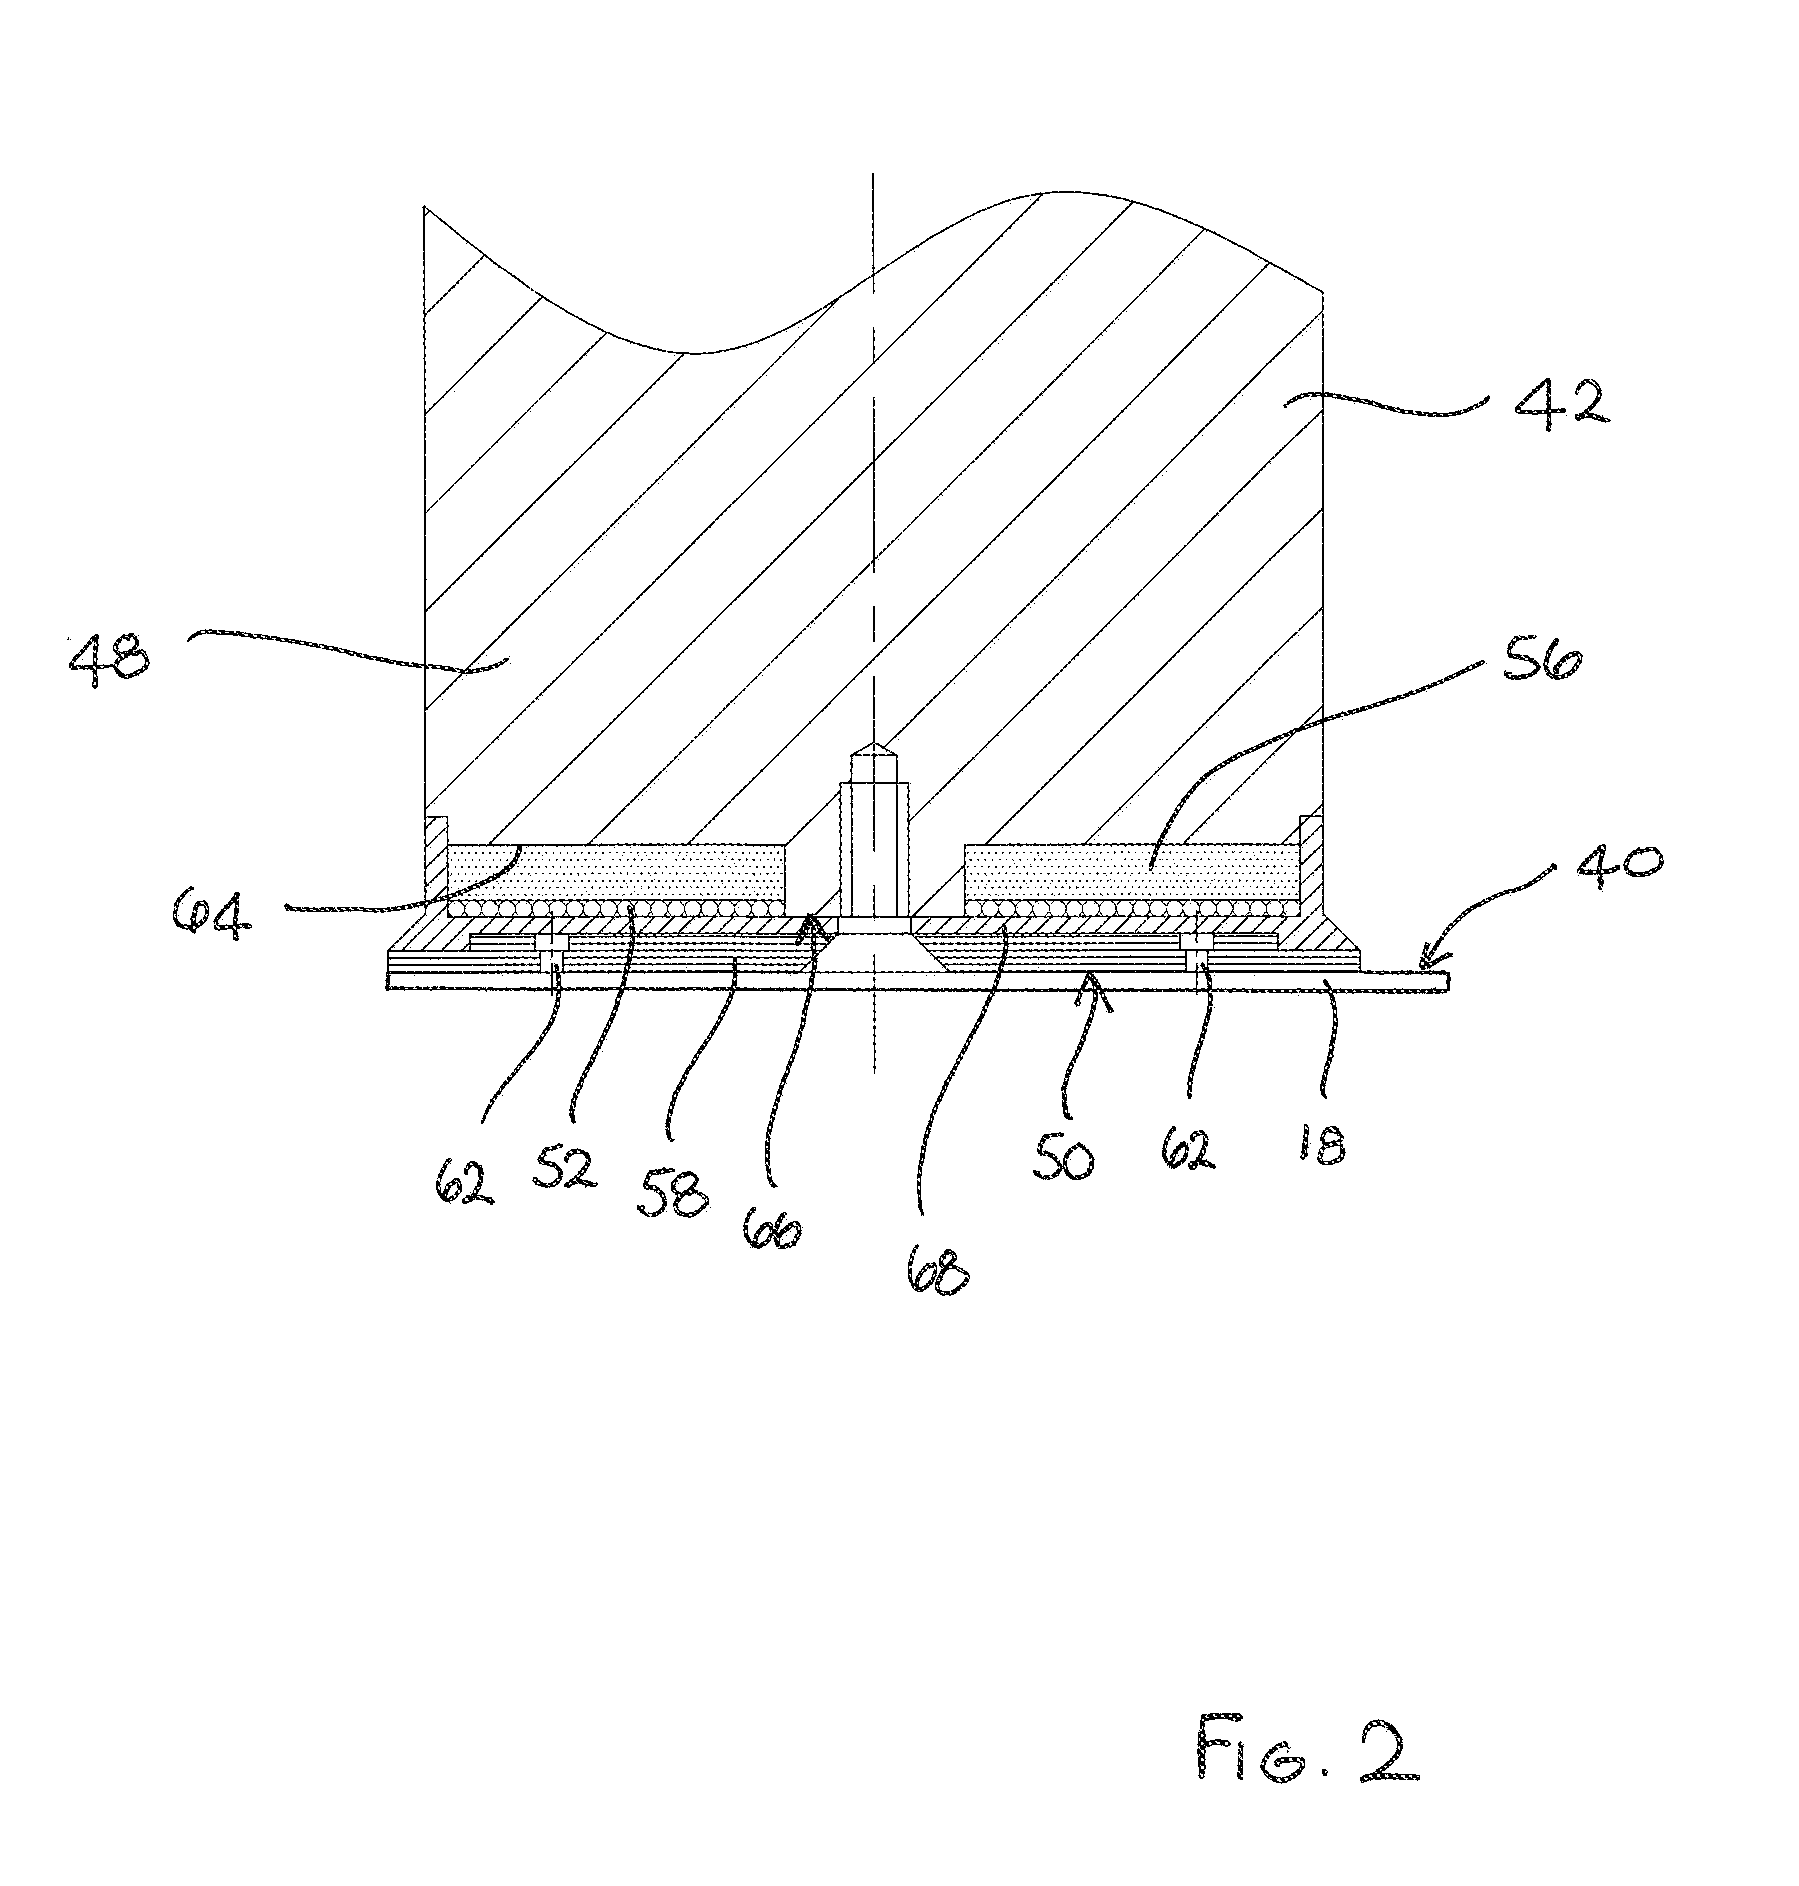 Apparatus and method for sealing a container